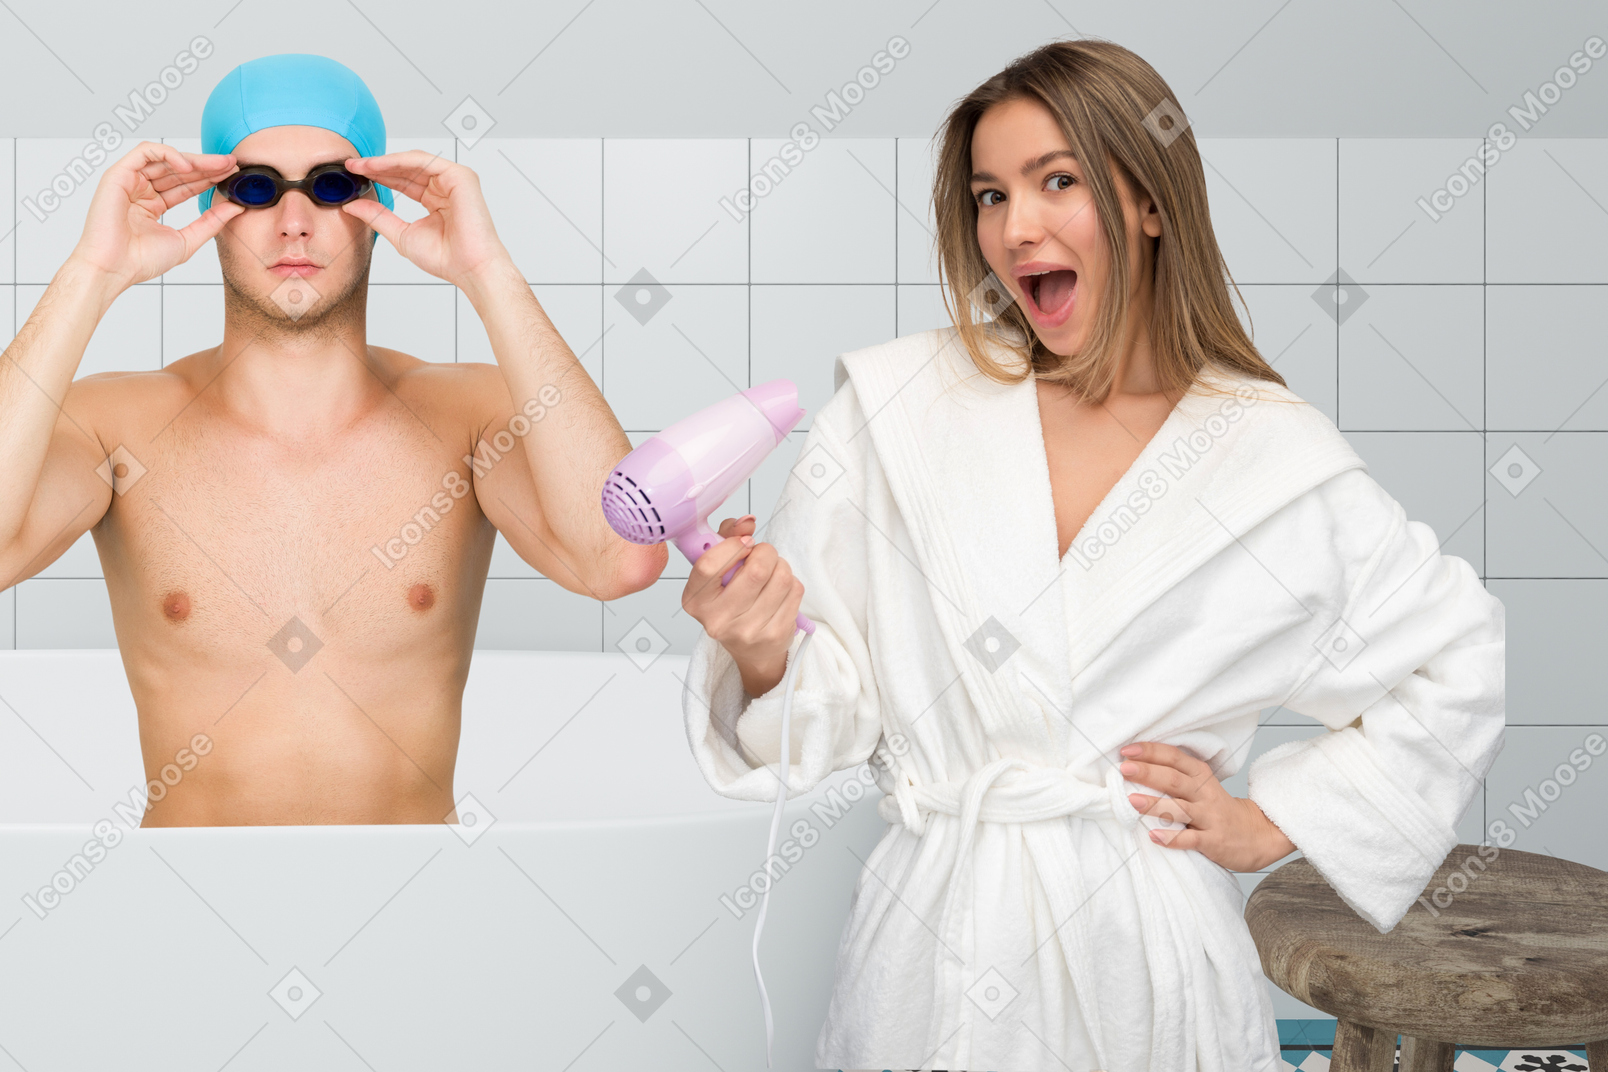 Man with swimming goggles and woman with hair dryer standing in bathroom